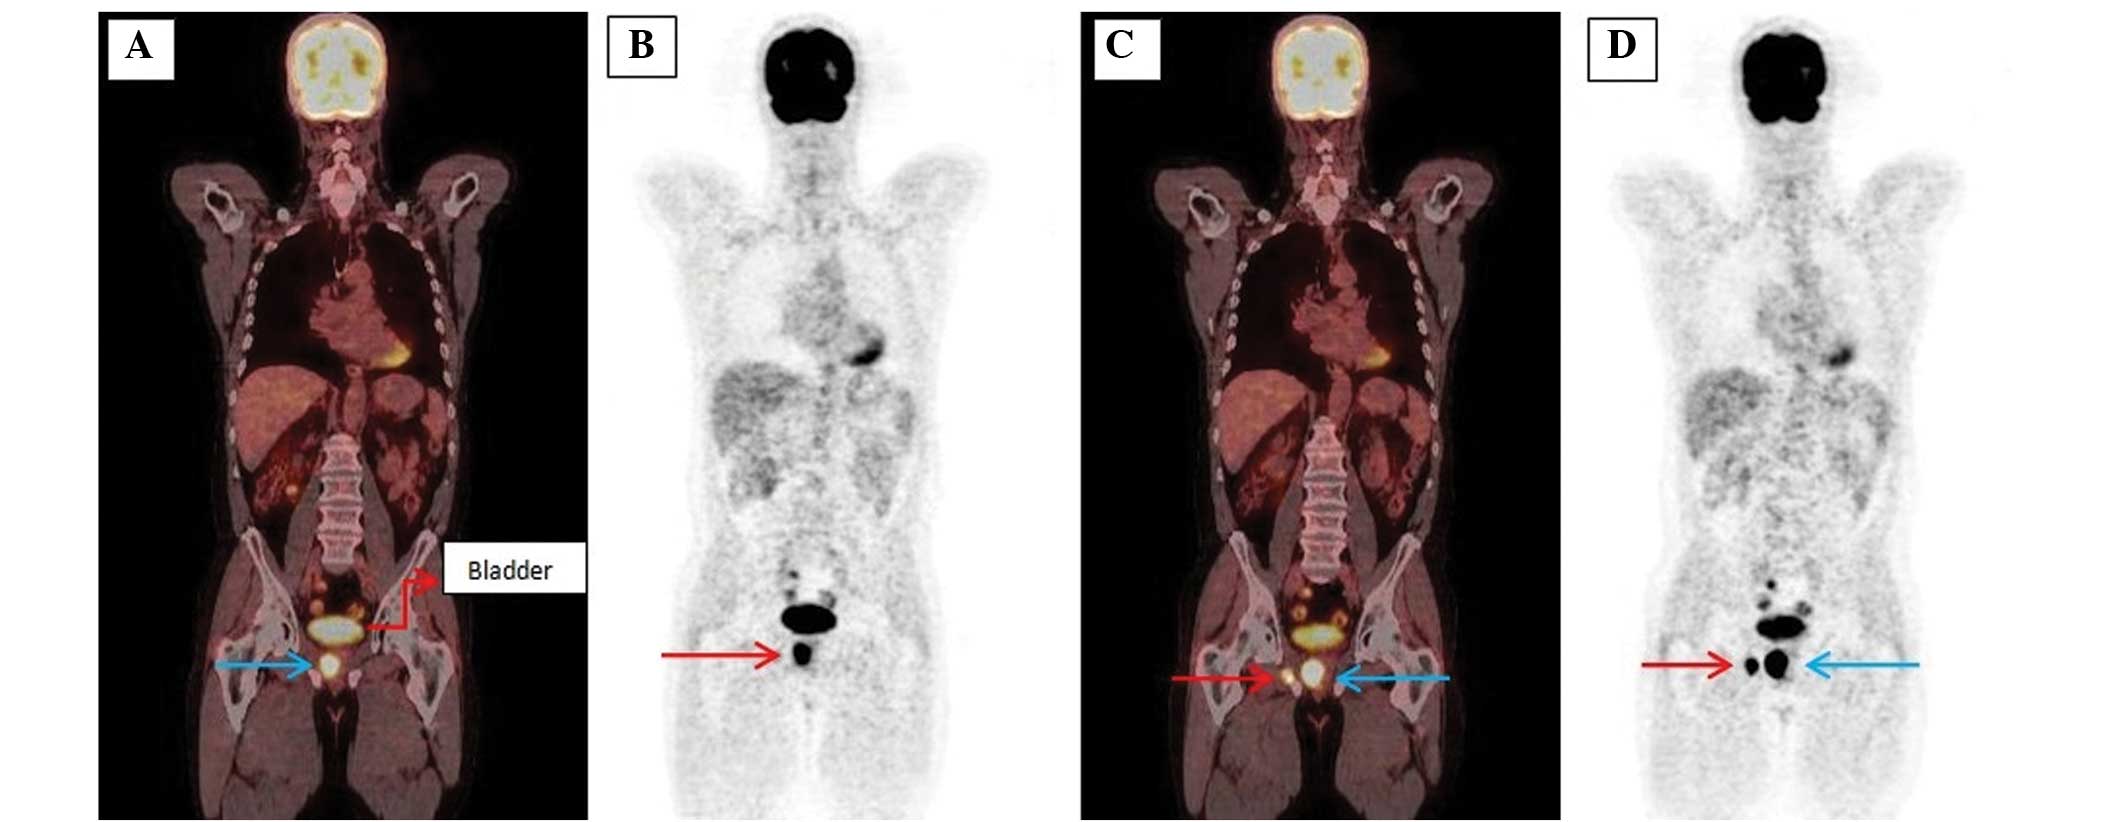 18f Fluorodeoxyglucose Petct For Detection Of Disease In Patients With